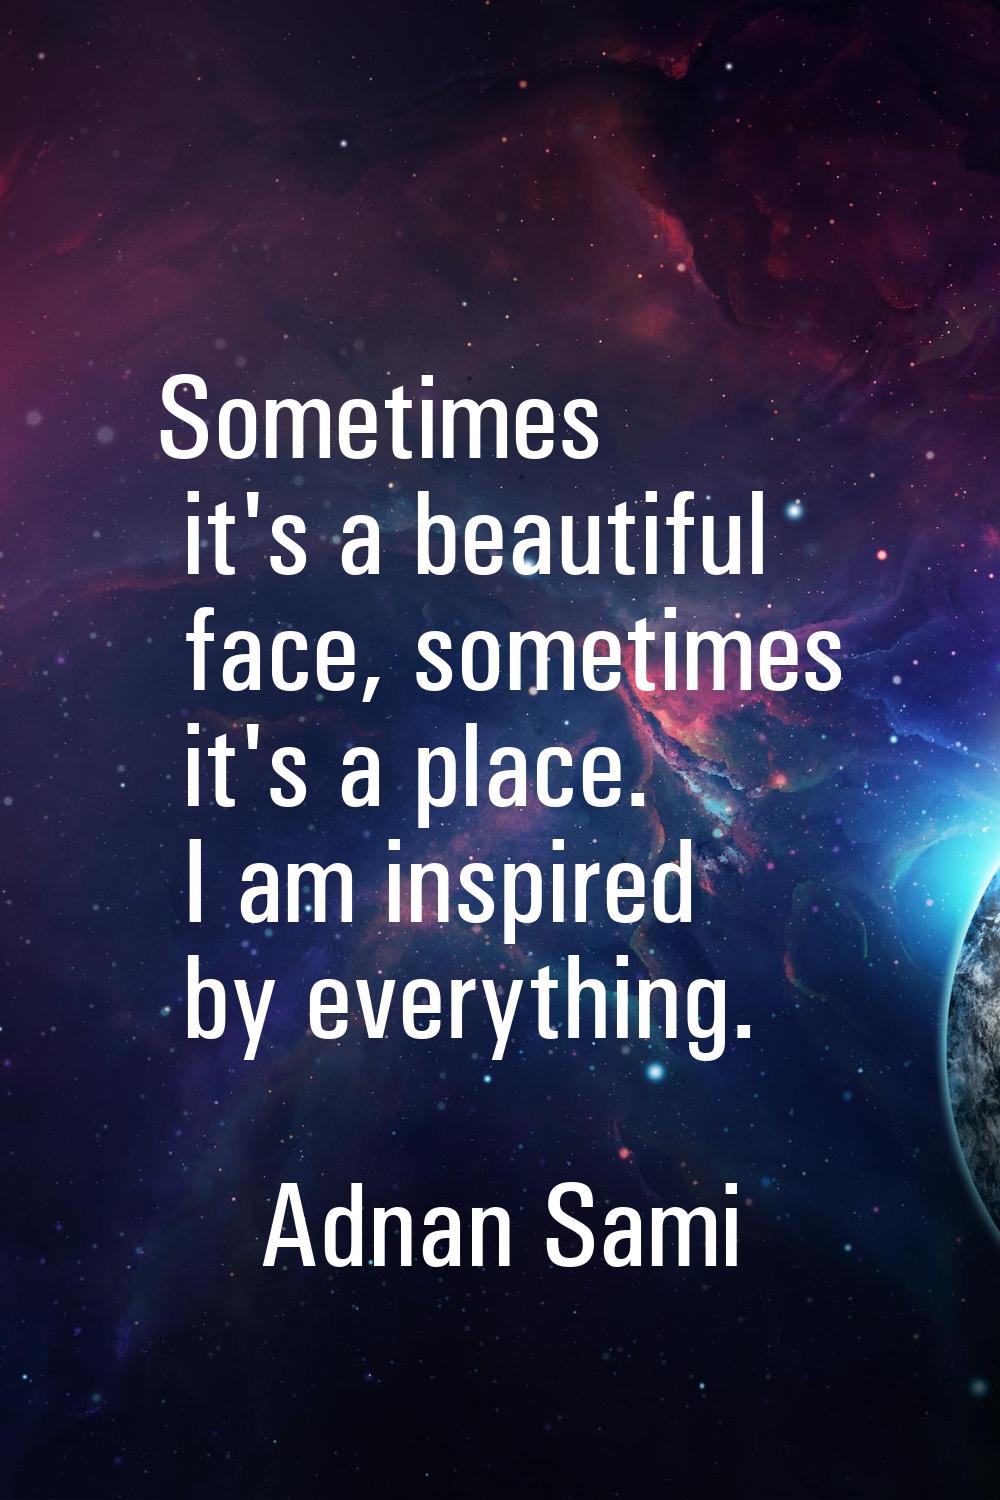 Sometimes it's a beautiful face, sometimes it's a place. I am inspired by everything.